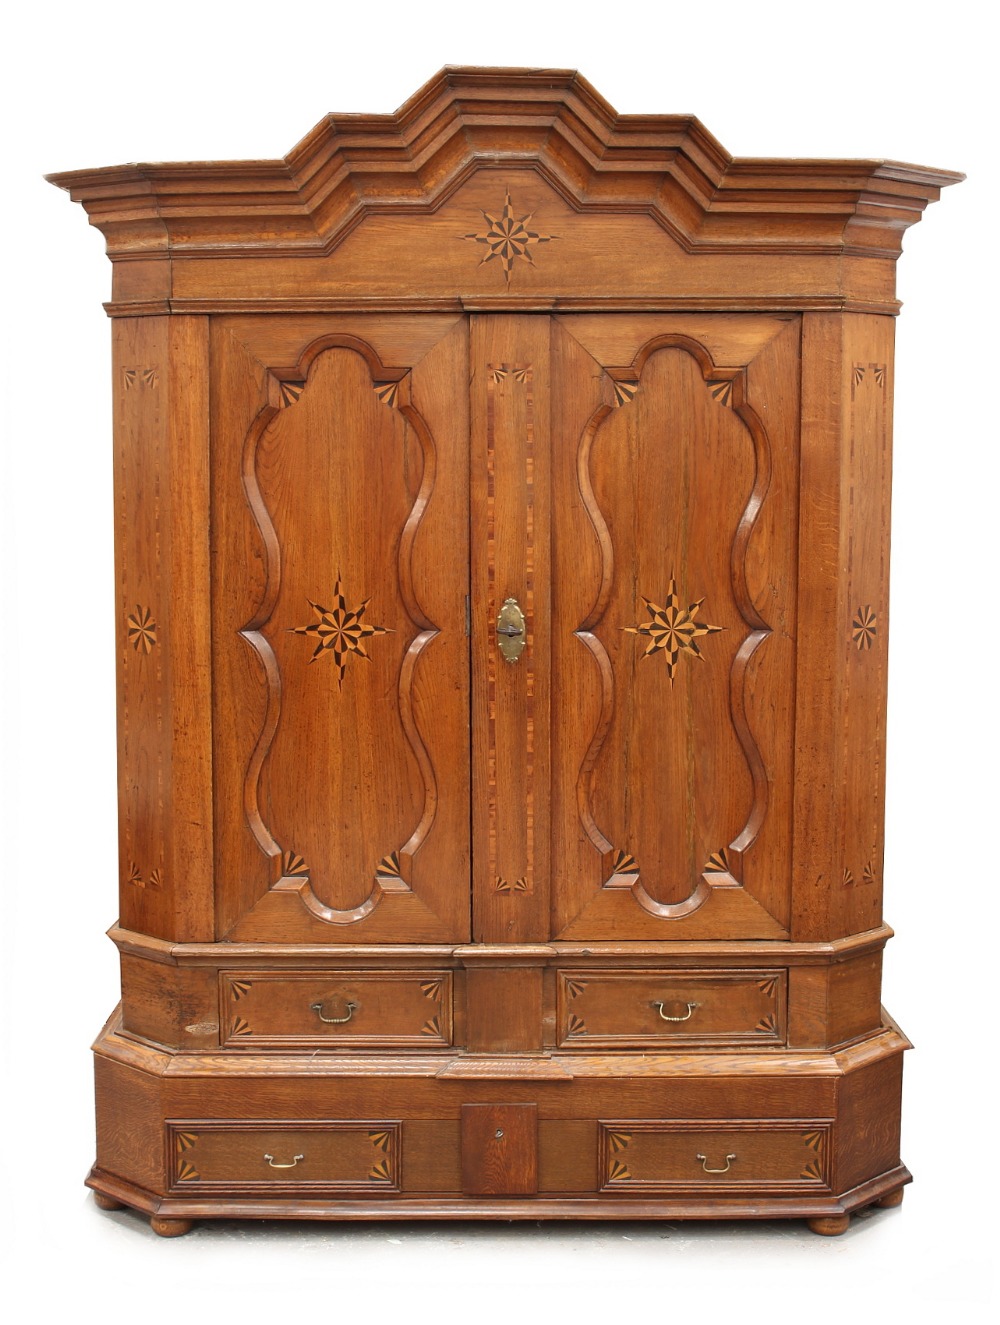 Property of a lady - an impressive 19th century Dutch oak & marquetry inlaid two-door armoire, the